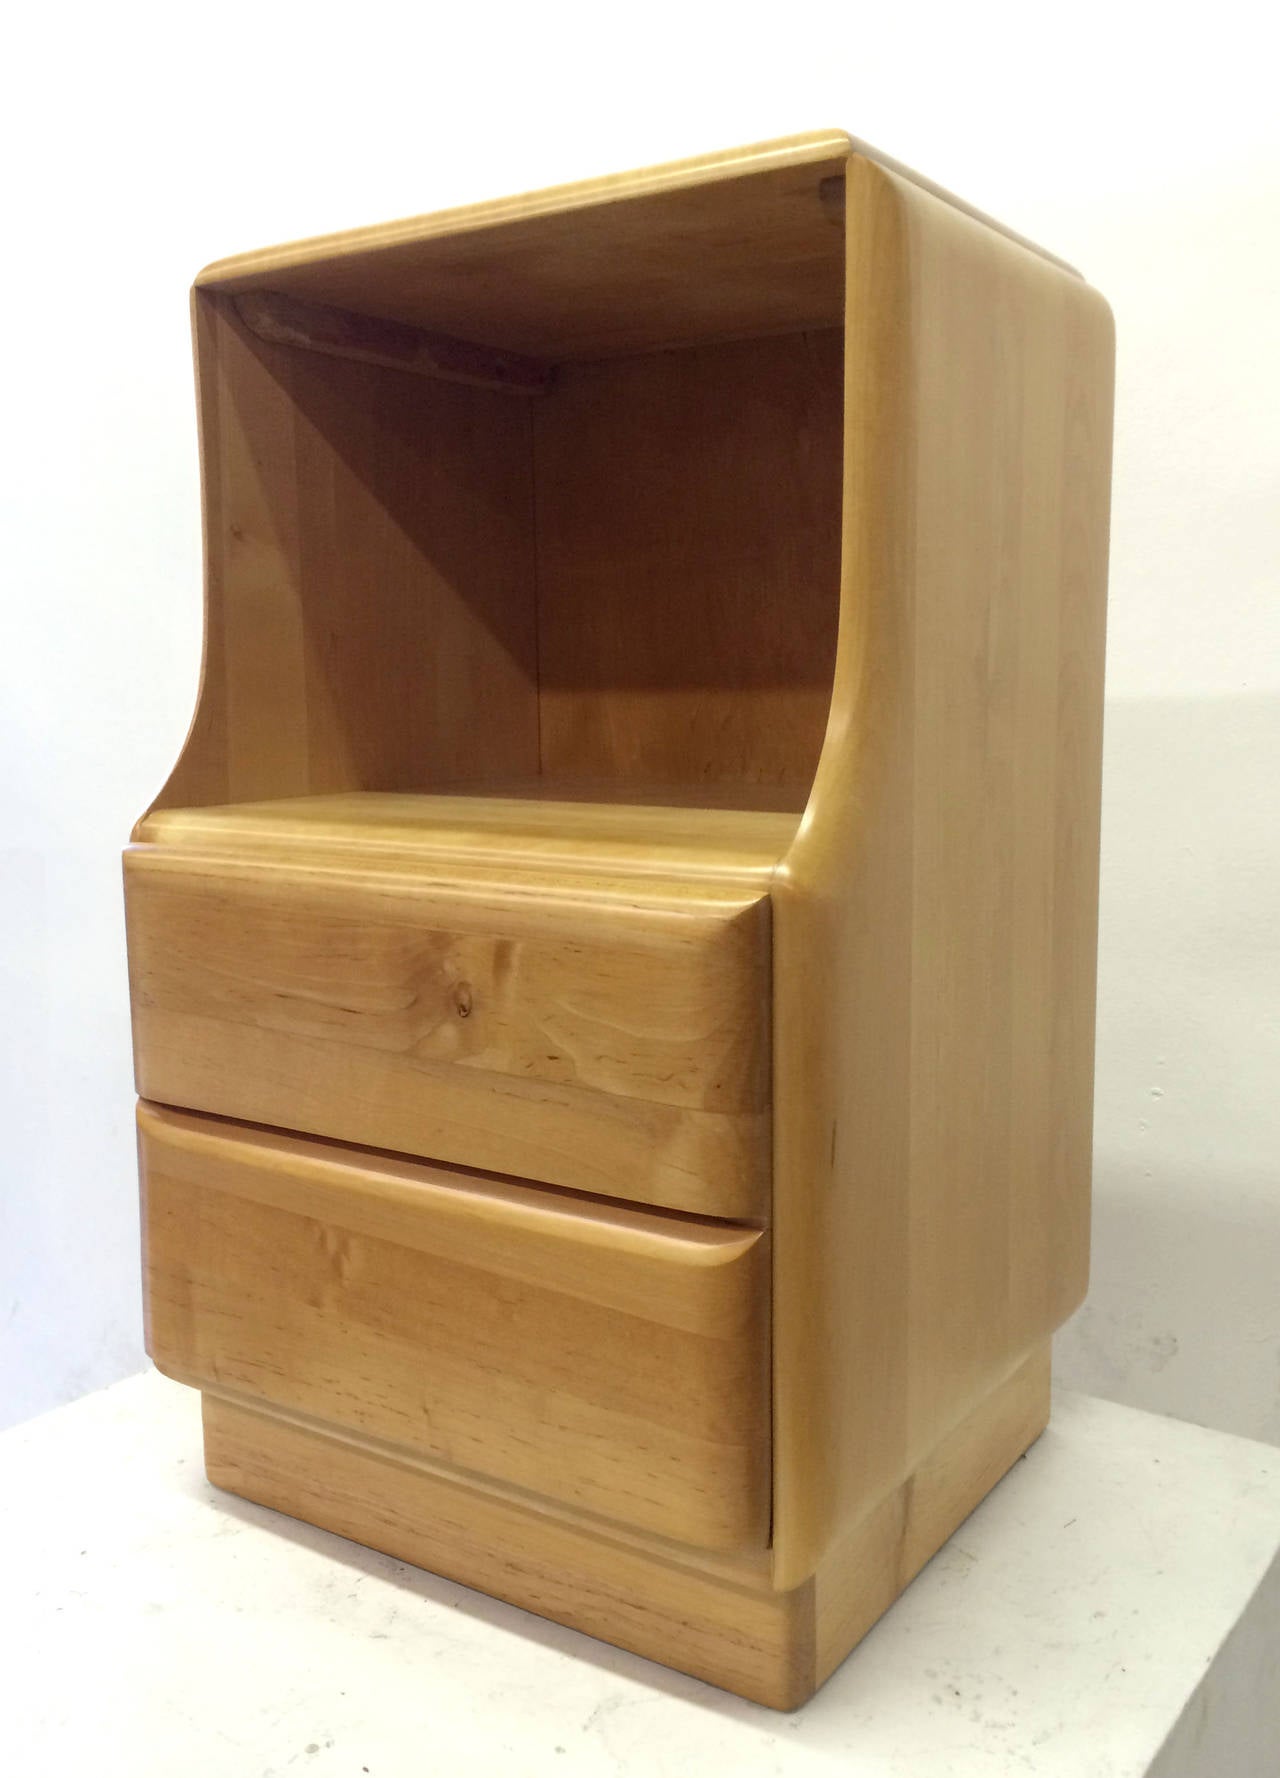 This pair of blonde wood nightstands feature a large storage cavity that sits upon a single drawer disguised as two. The slightly curved edges coupled with the blonde solid maple and excellent craftsmanship strongly recall the designs of Heywood